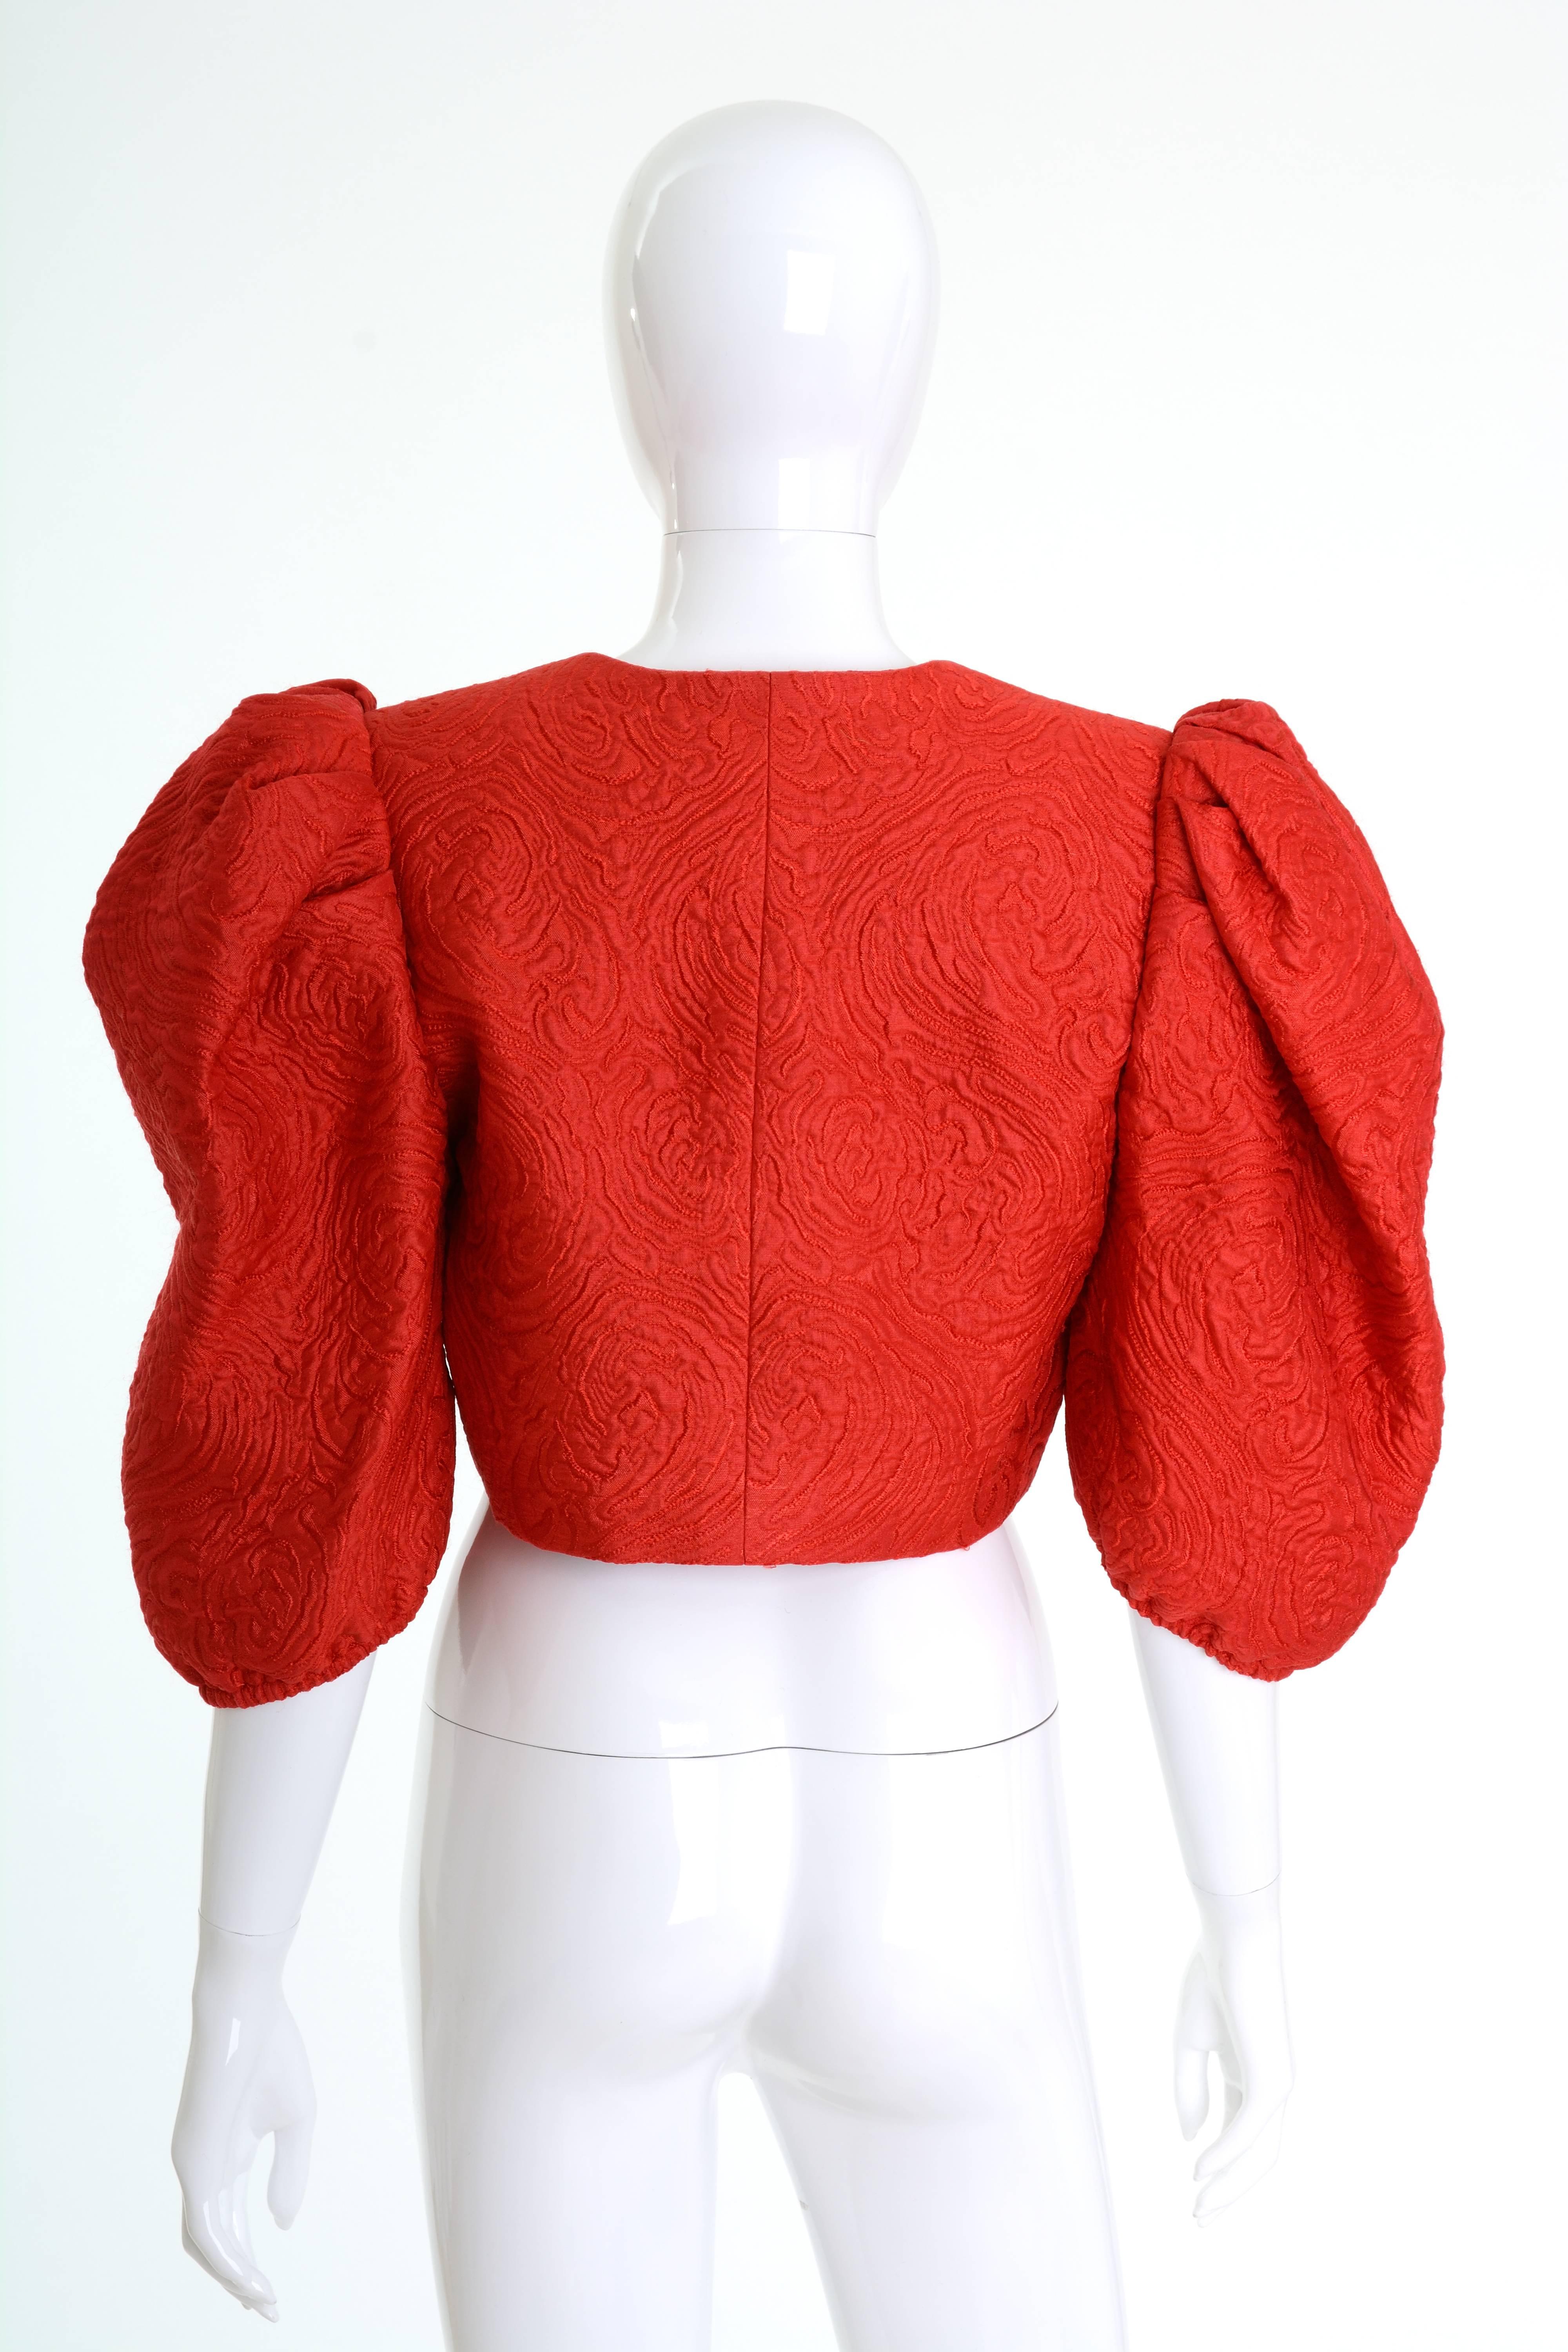 This gorgeous and iconic Yves Saint Laurent 1980s bolero jacket is in a red quilted satin fabric. It has large padded shoulders and amazing puffed sleeve. It's fully lined.

Label: Saint Laurent Rive Gauche - Made in France
Fabric: quilted